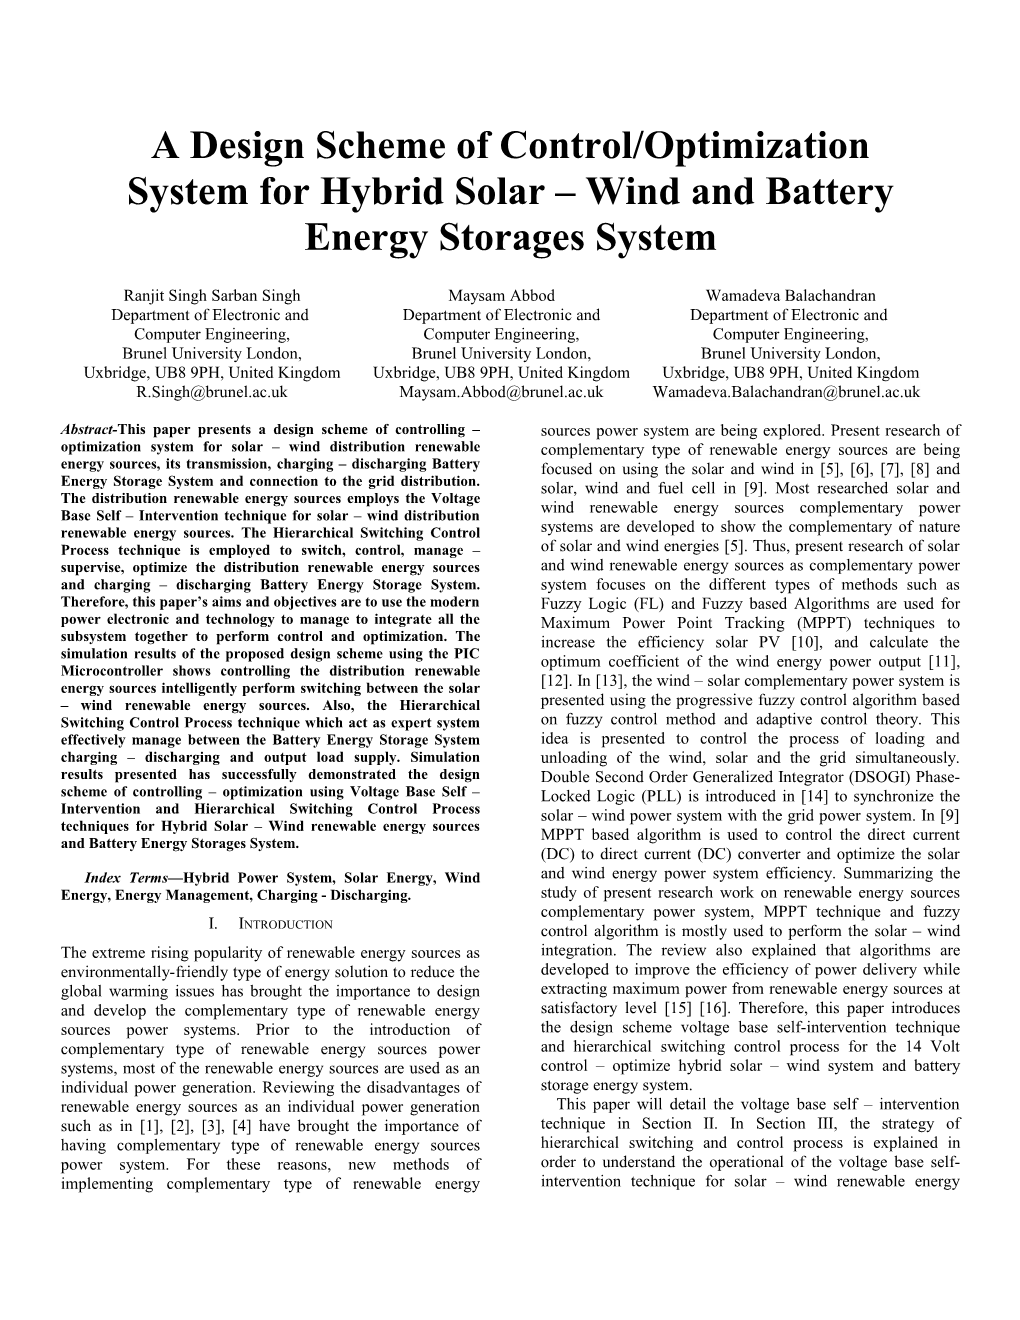 A Design Scheme of Control/Optimization System for Hybrid Solar Wind and Battery Energy